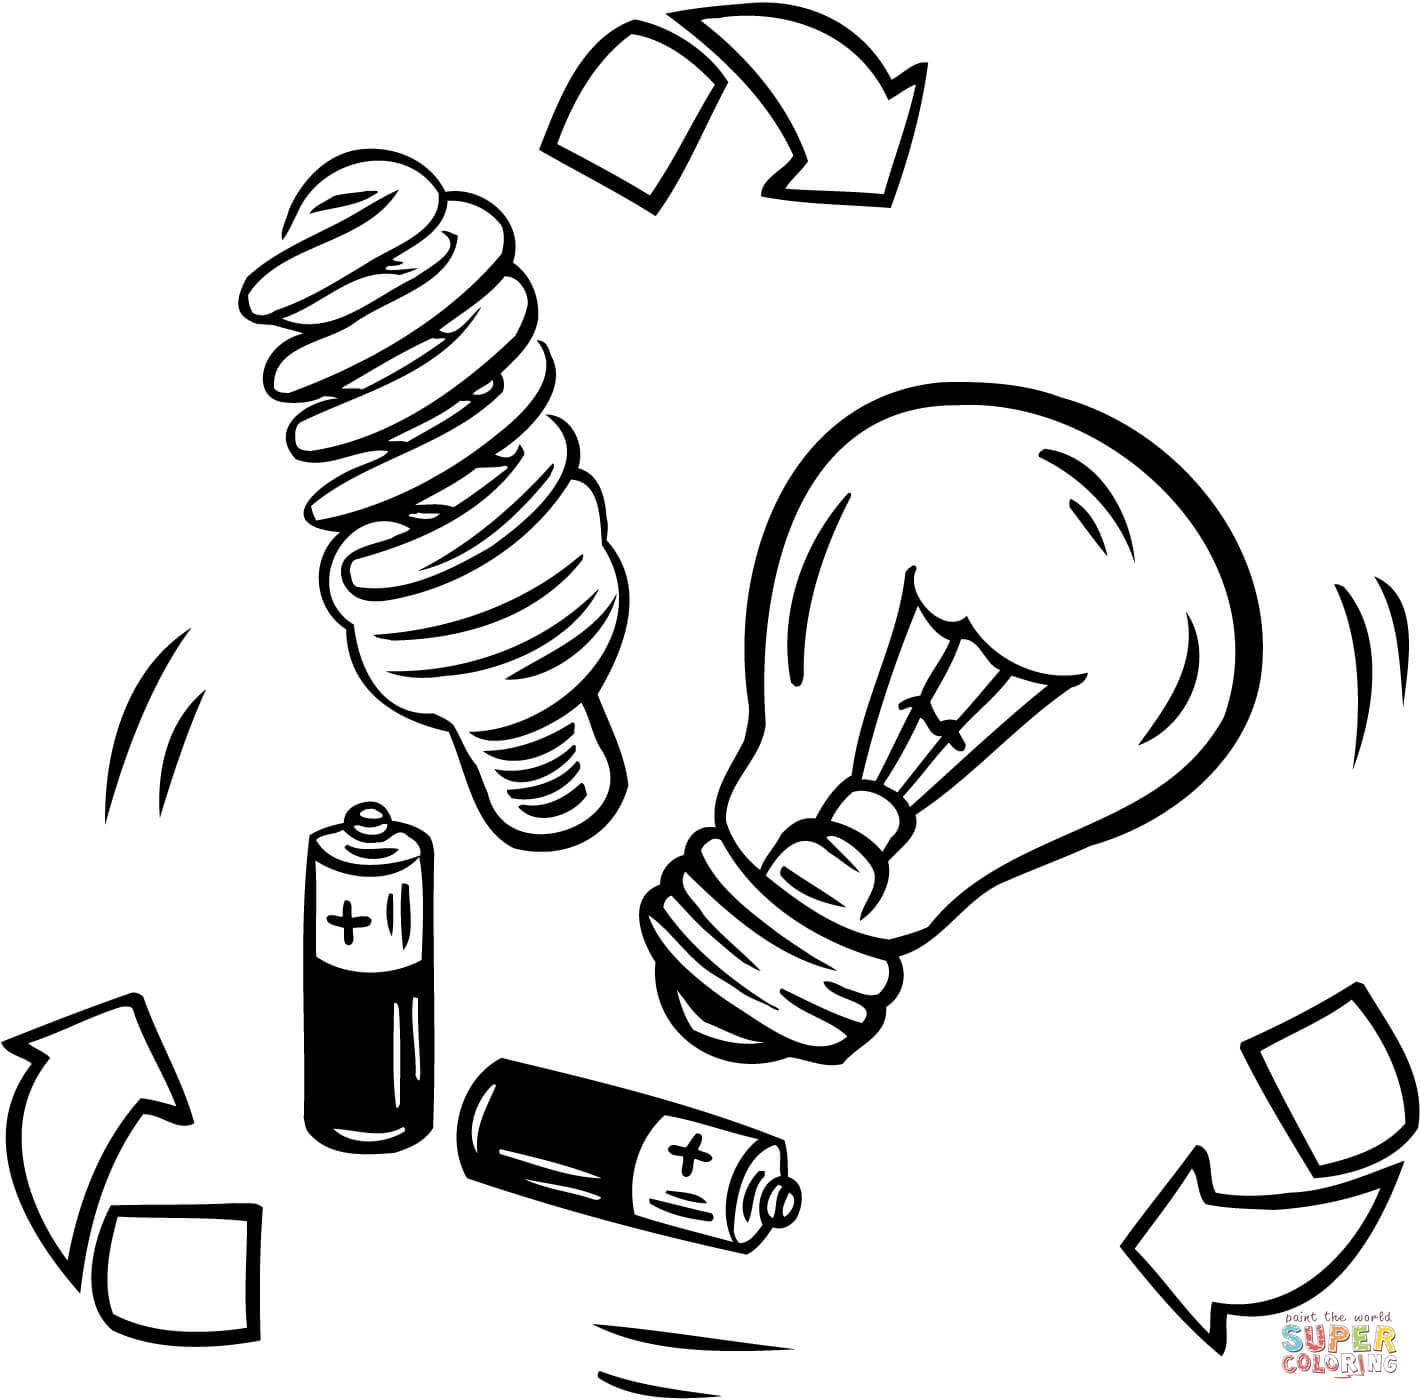 Battery and bulb recycling coloring page | Free Printable Coloring ...